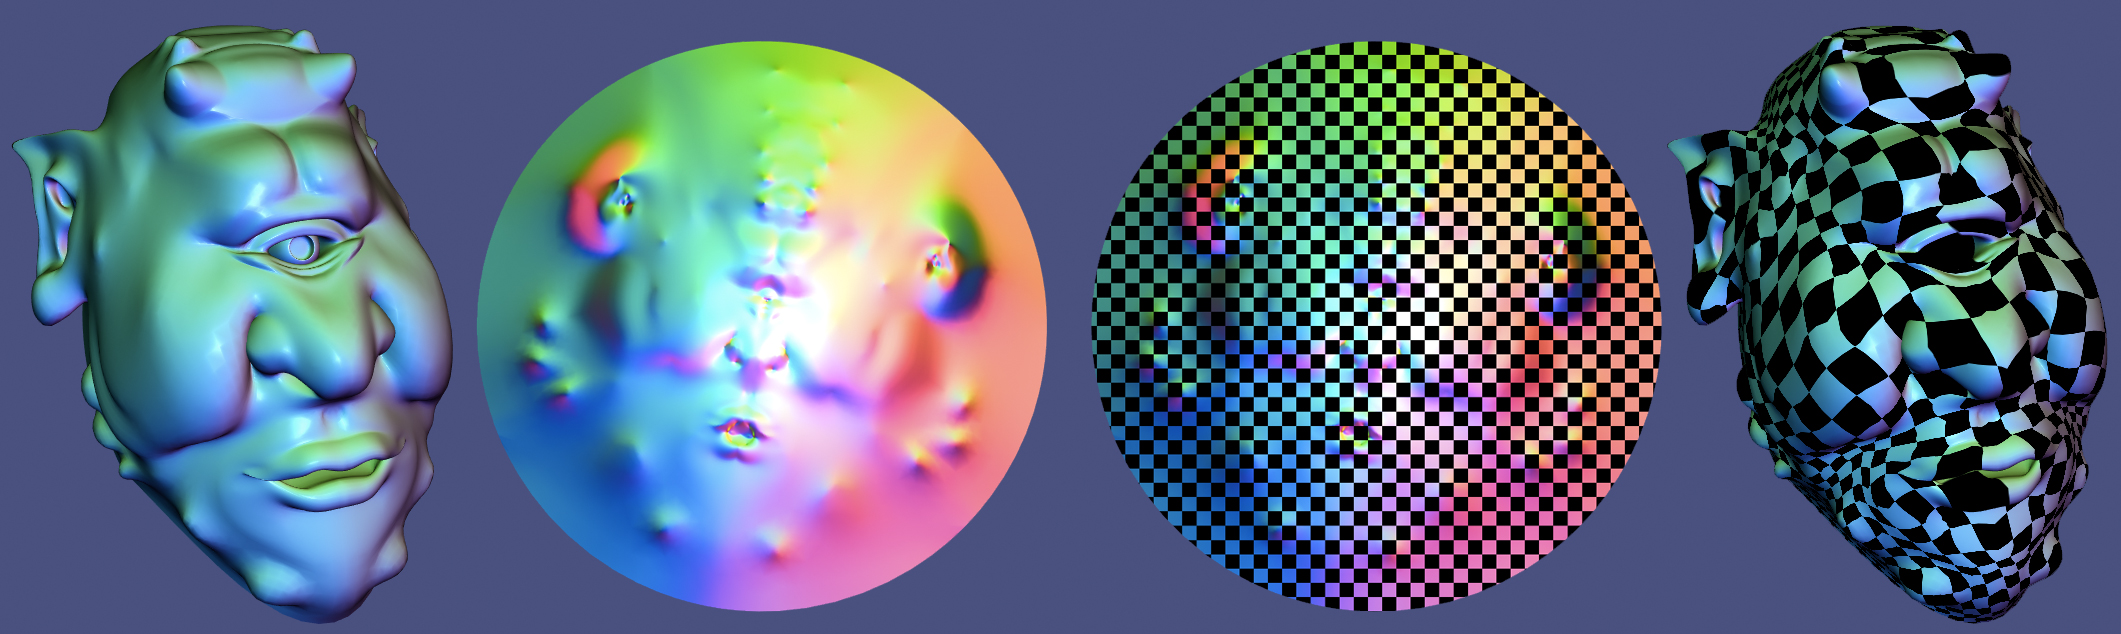 The Tutte embedding of the 3D Ogre mesh leads to severe distortion. Overlaying a checkerboard pattern on the 2D domain and visualizing it on the 3D surface shows the wobbliness of the non-smooth mapping and stretching.